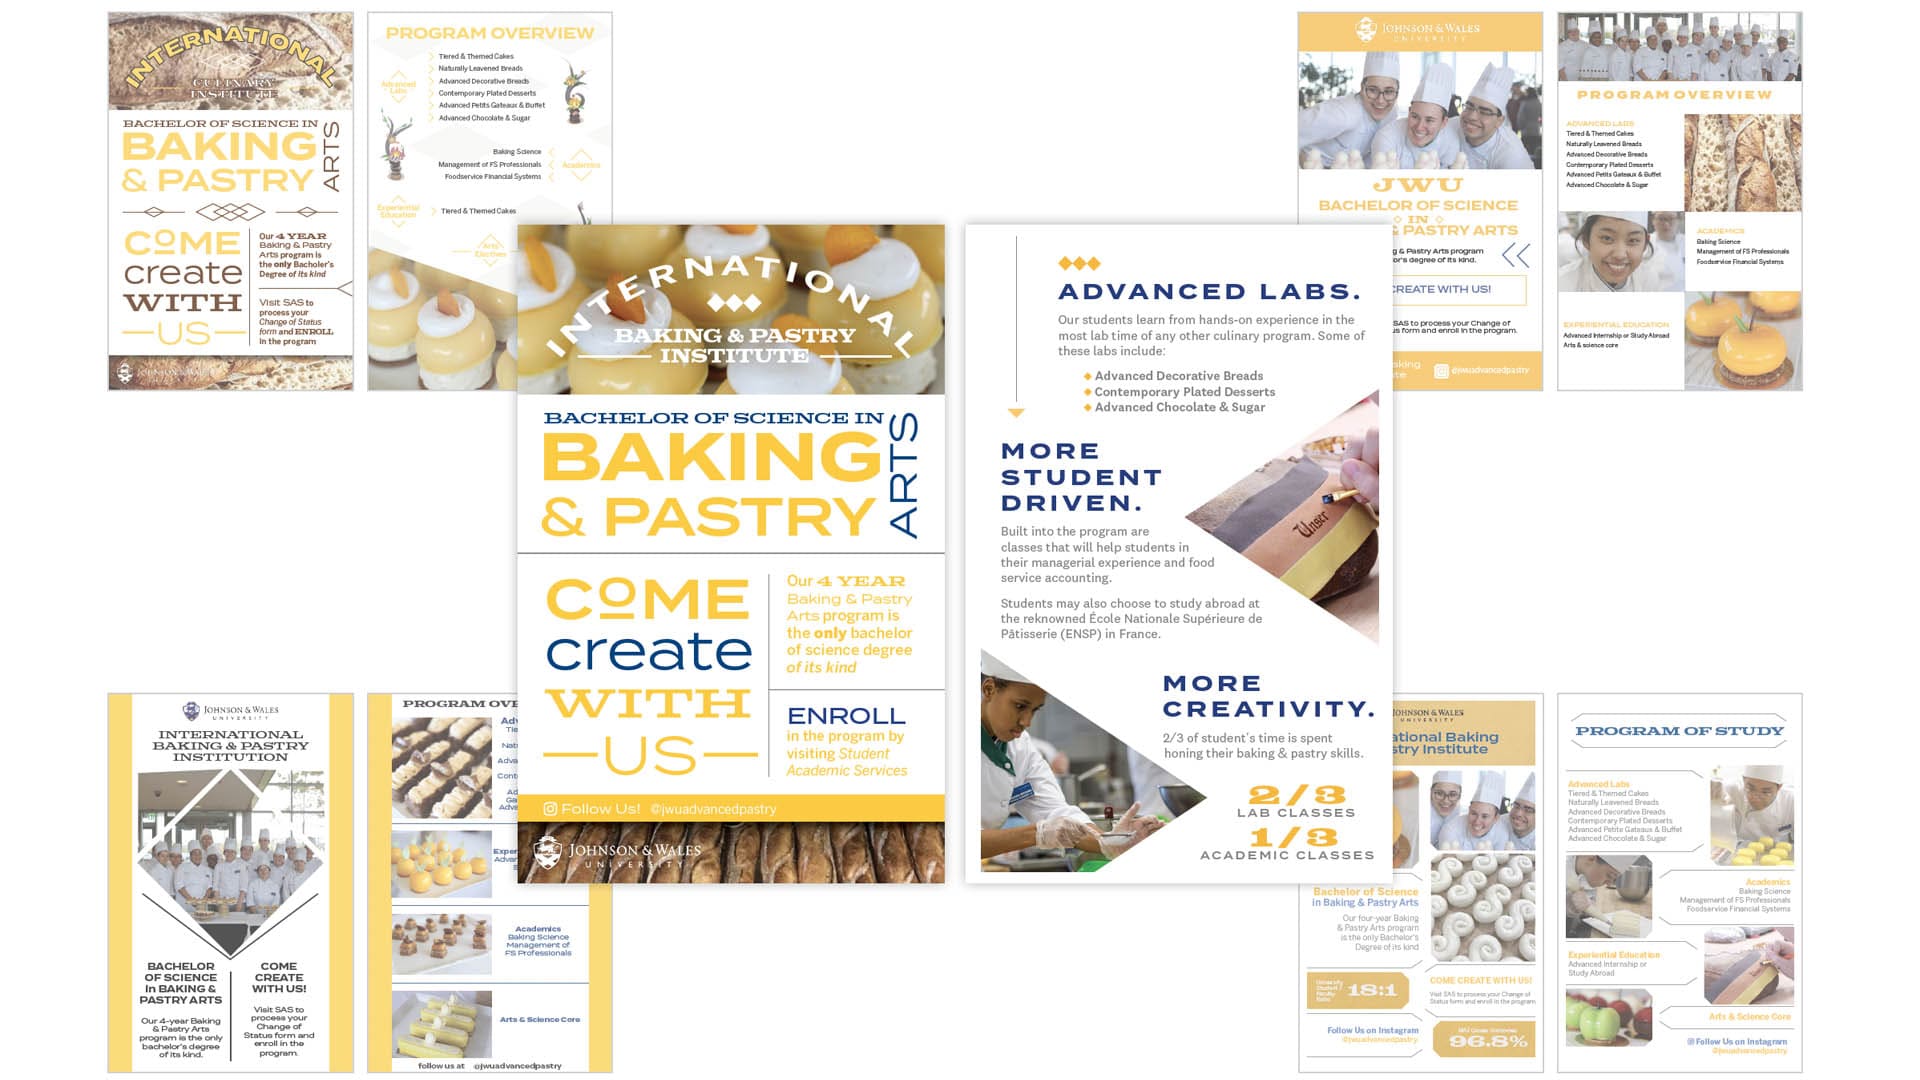 LeeAnn Florez, Julia Johnson, Laura Messenger and Tommy Milazzo designed a promotional materials for JWU’s Baking & Pastry Arts bachelor’s degree.